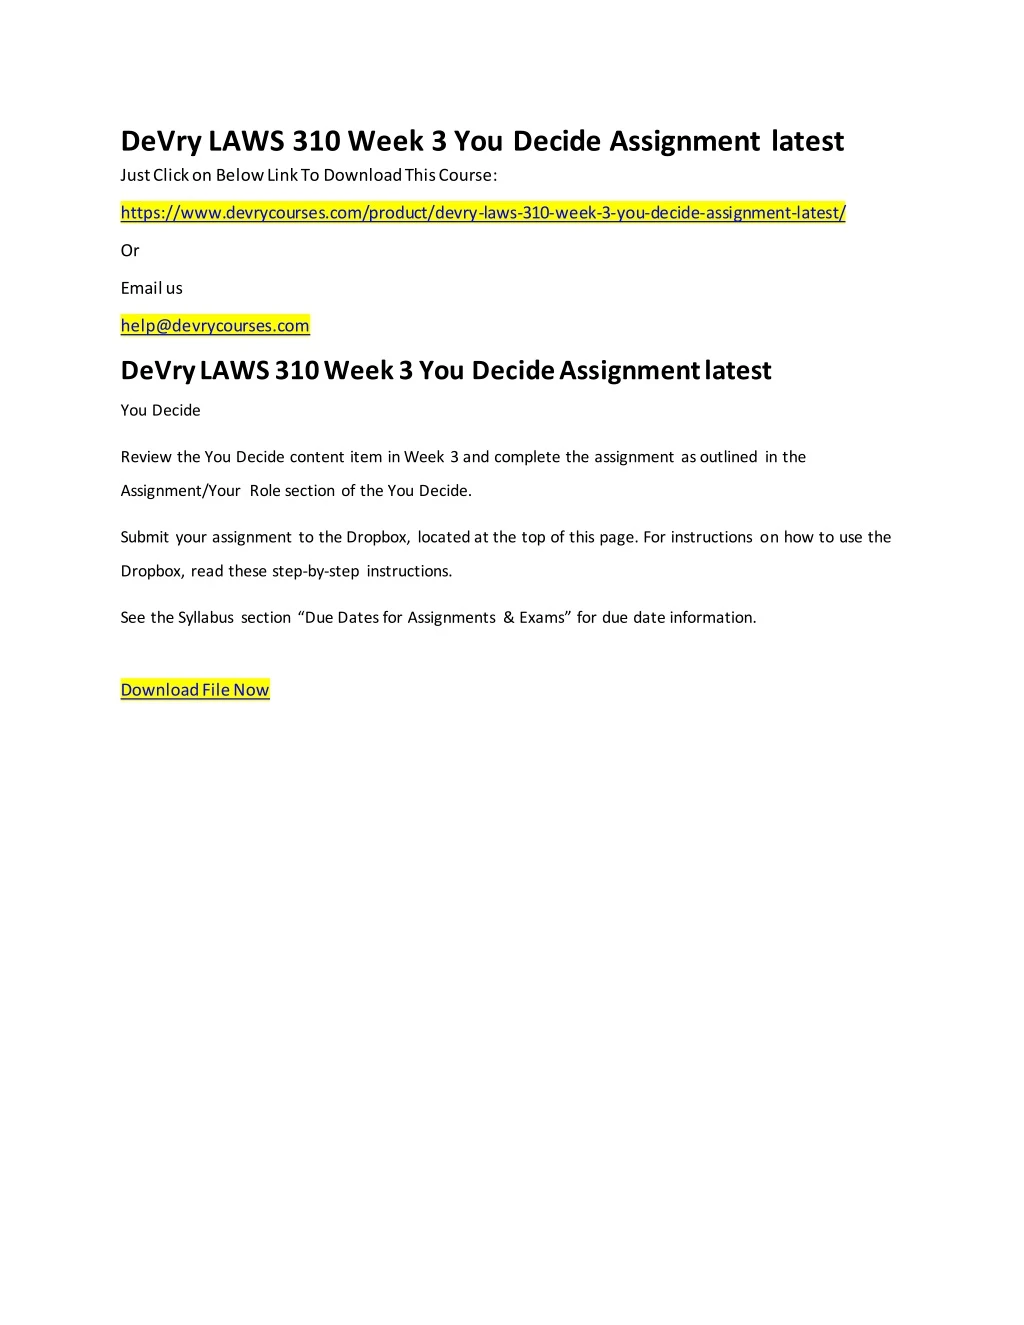 devry laws 310 week 3 you decide assignment